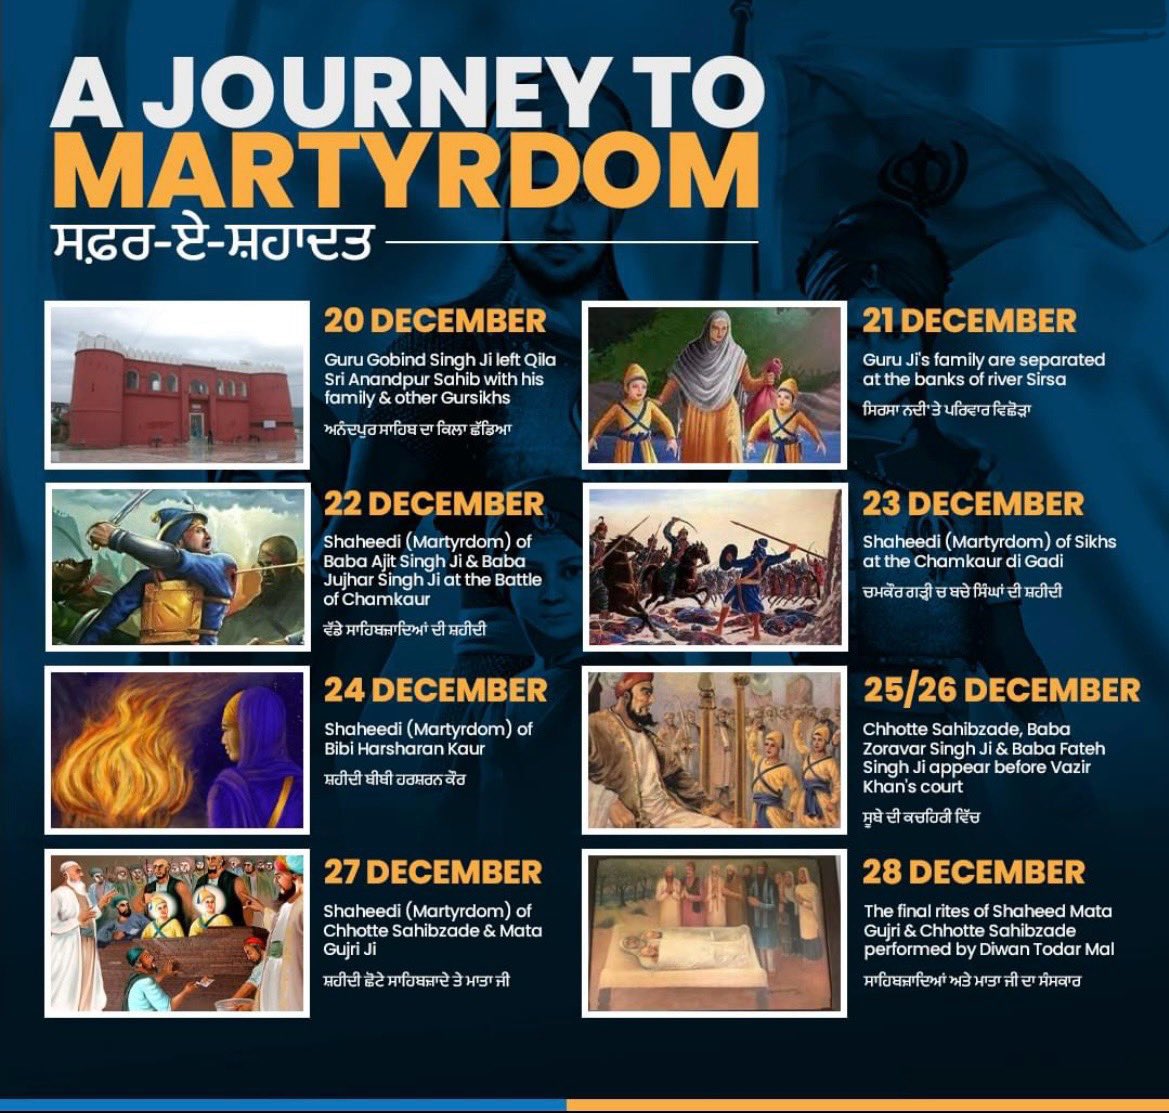 A journey of Shaheedi (Martyrdom) - As Sikhs, let’s us not only remember our Shaheeds ultimate sacrifices, but also take inspiration from their strength, faith and determination and challenge injustice in all its forms of life🙏🏻🪯
#GuruGobindSinghJi #ChaarSahibzaade #MataGujriJi